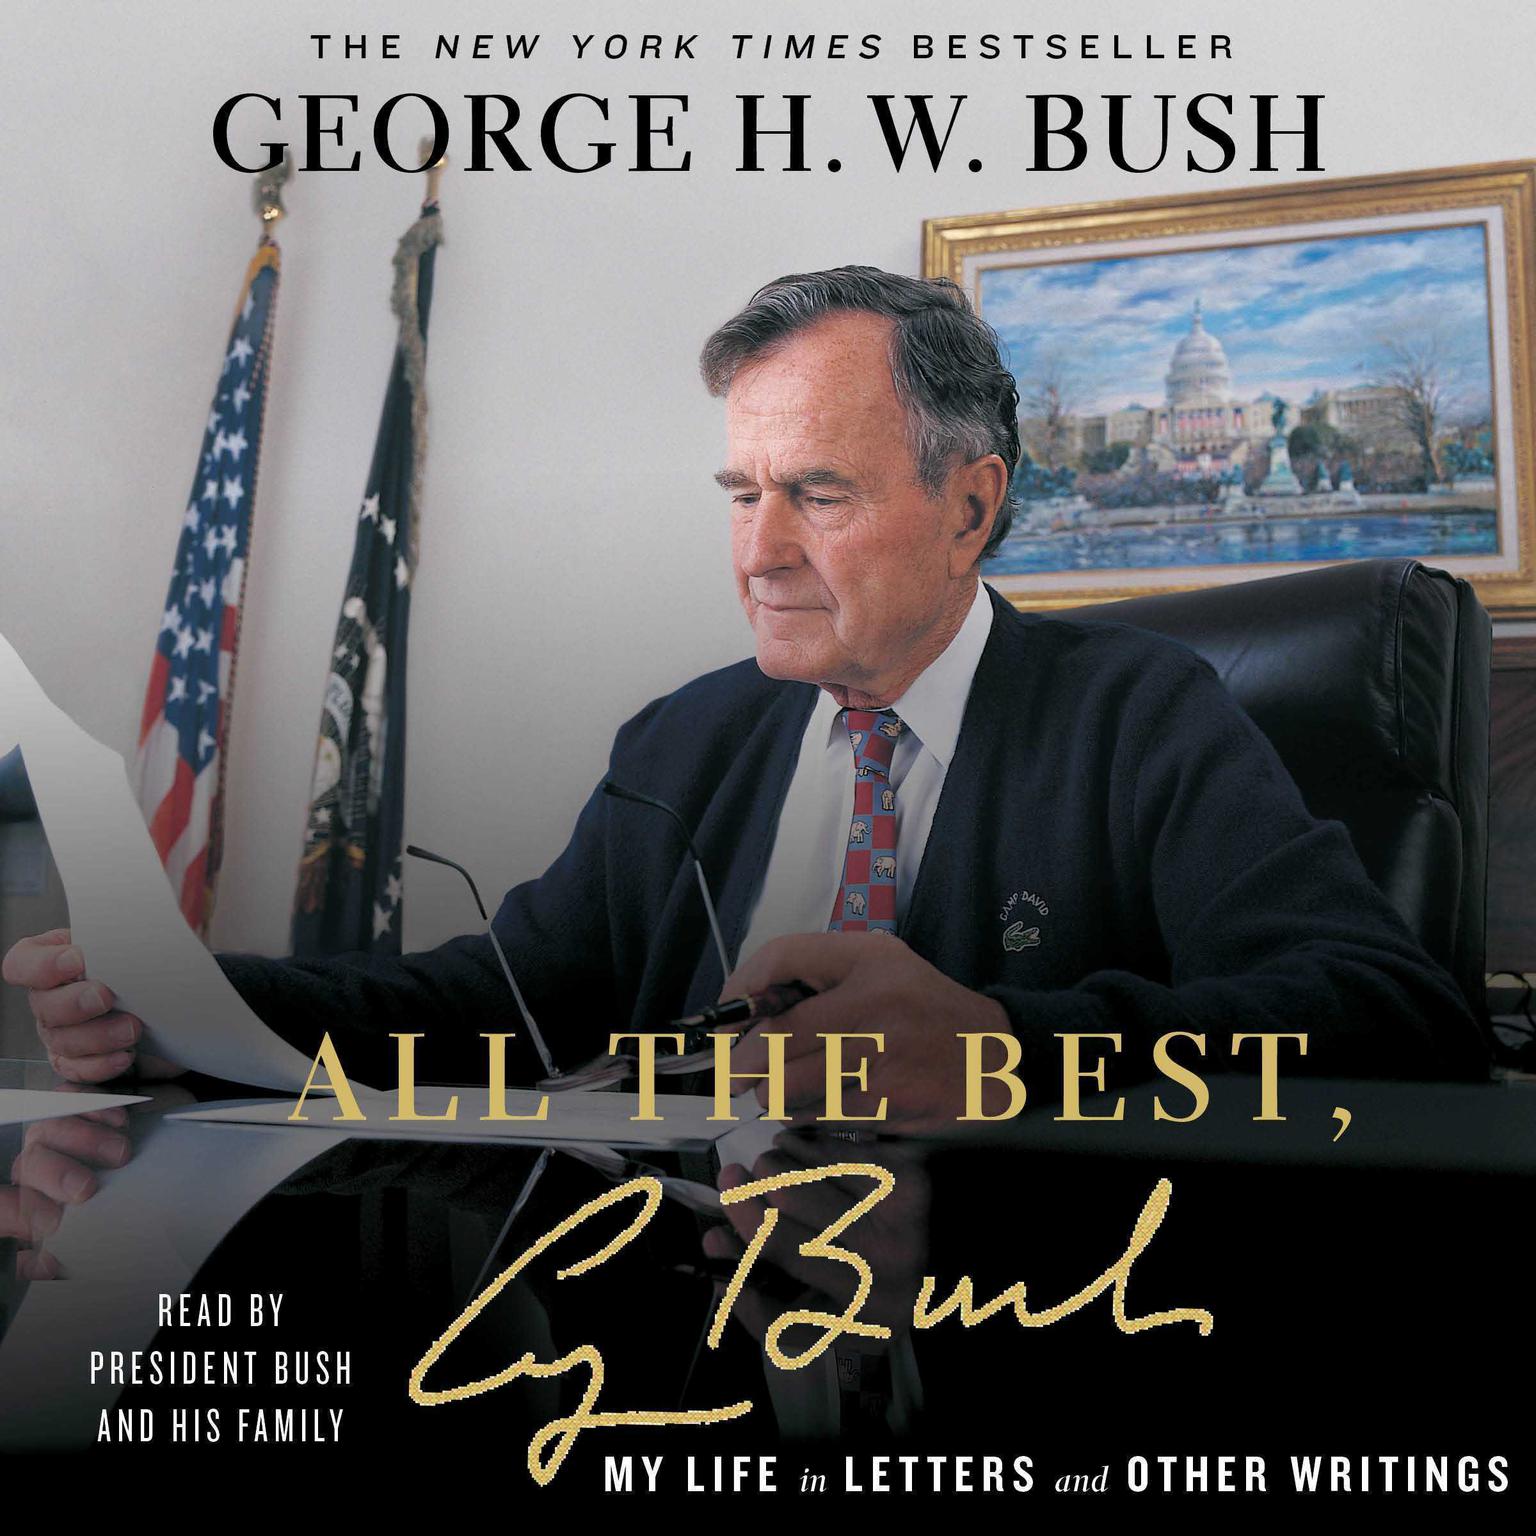 All the Best, George Bush (Abridged): My Life in Letters and Other Writings Audiobook, by George H. W. Bush